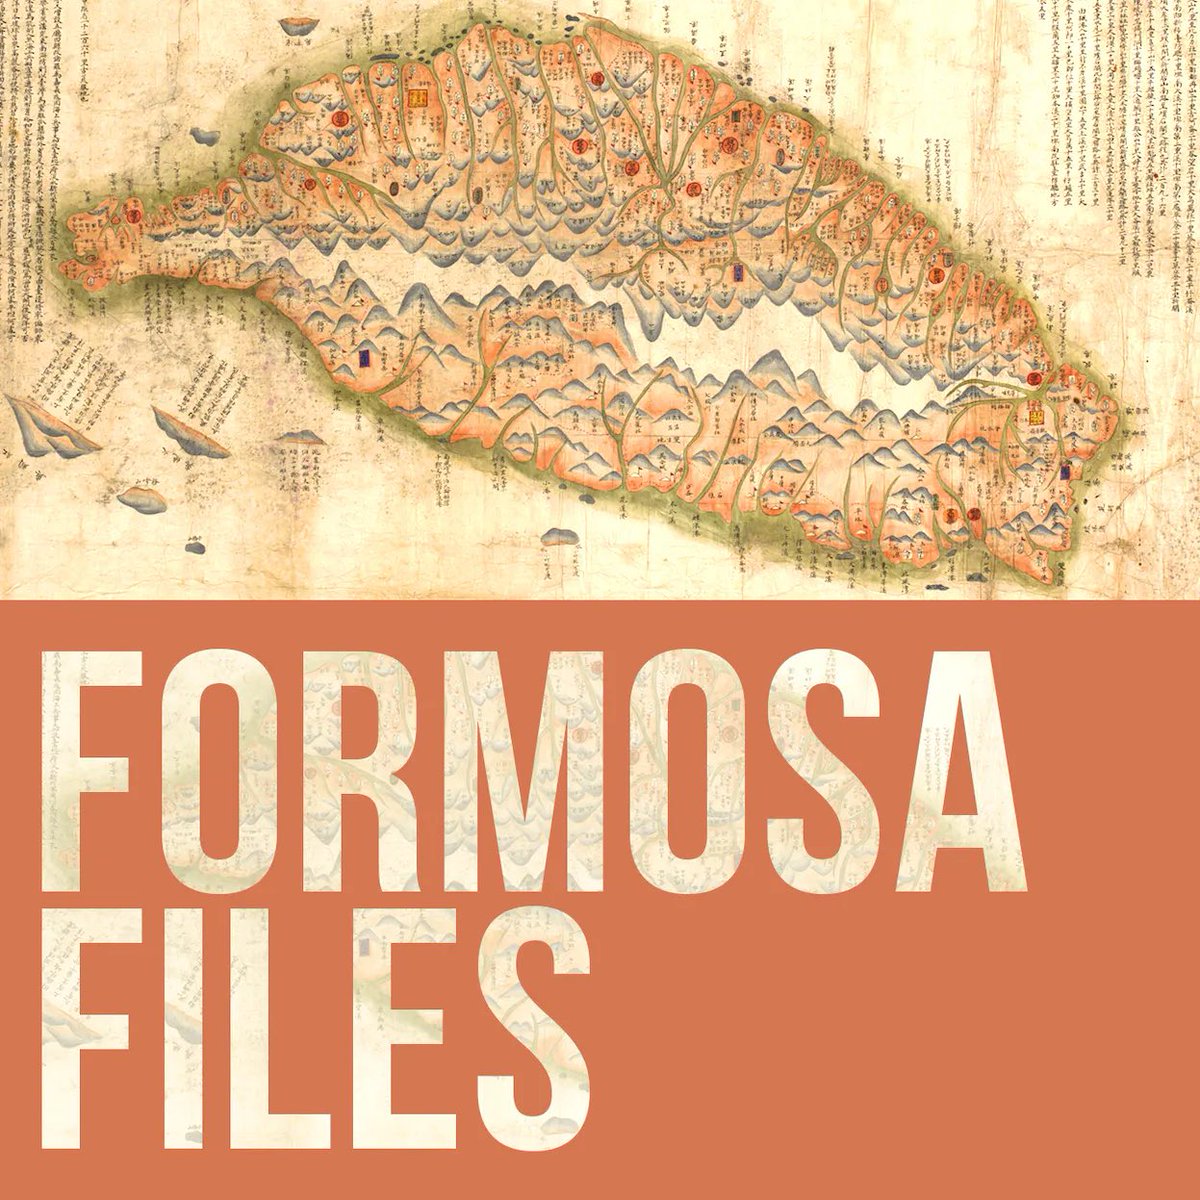 Are you, like me, too cheap/poor to pay for a @TheRestHistory Club membership? 

Then dip into ‘Formosa Files’ for free. 

#history #podcast #Taiwan #badaccents #RIHlive